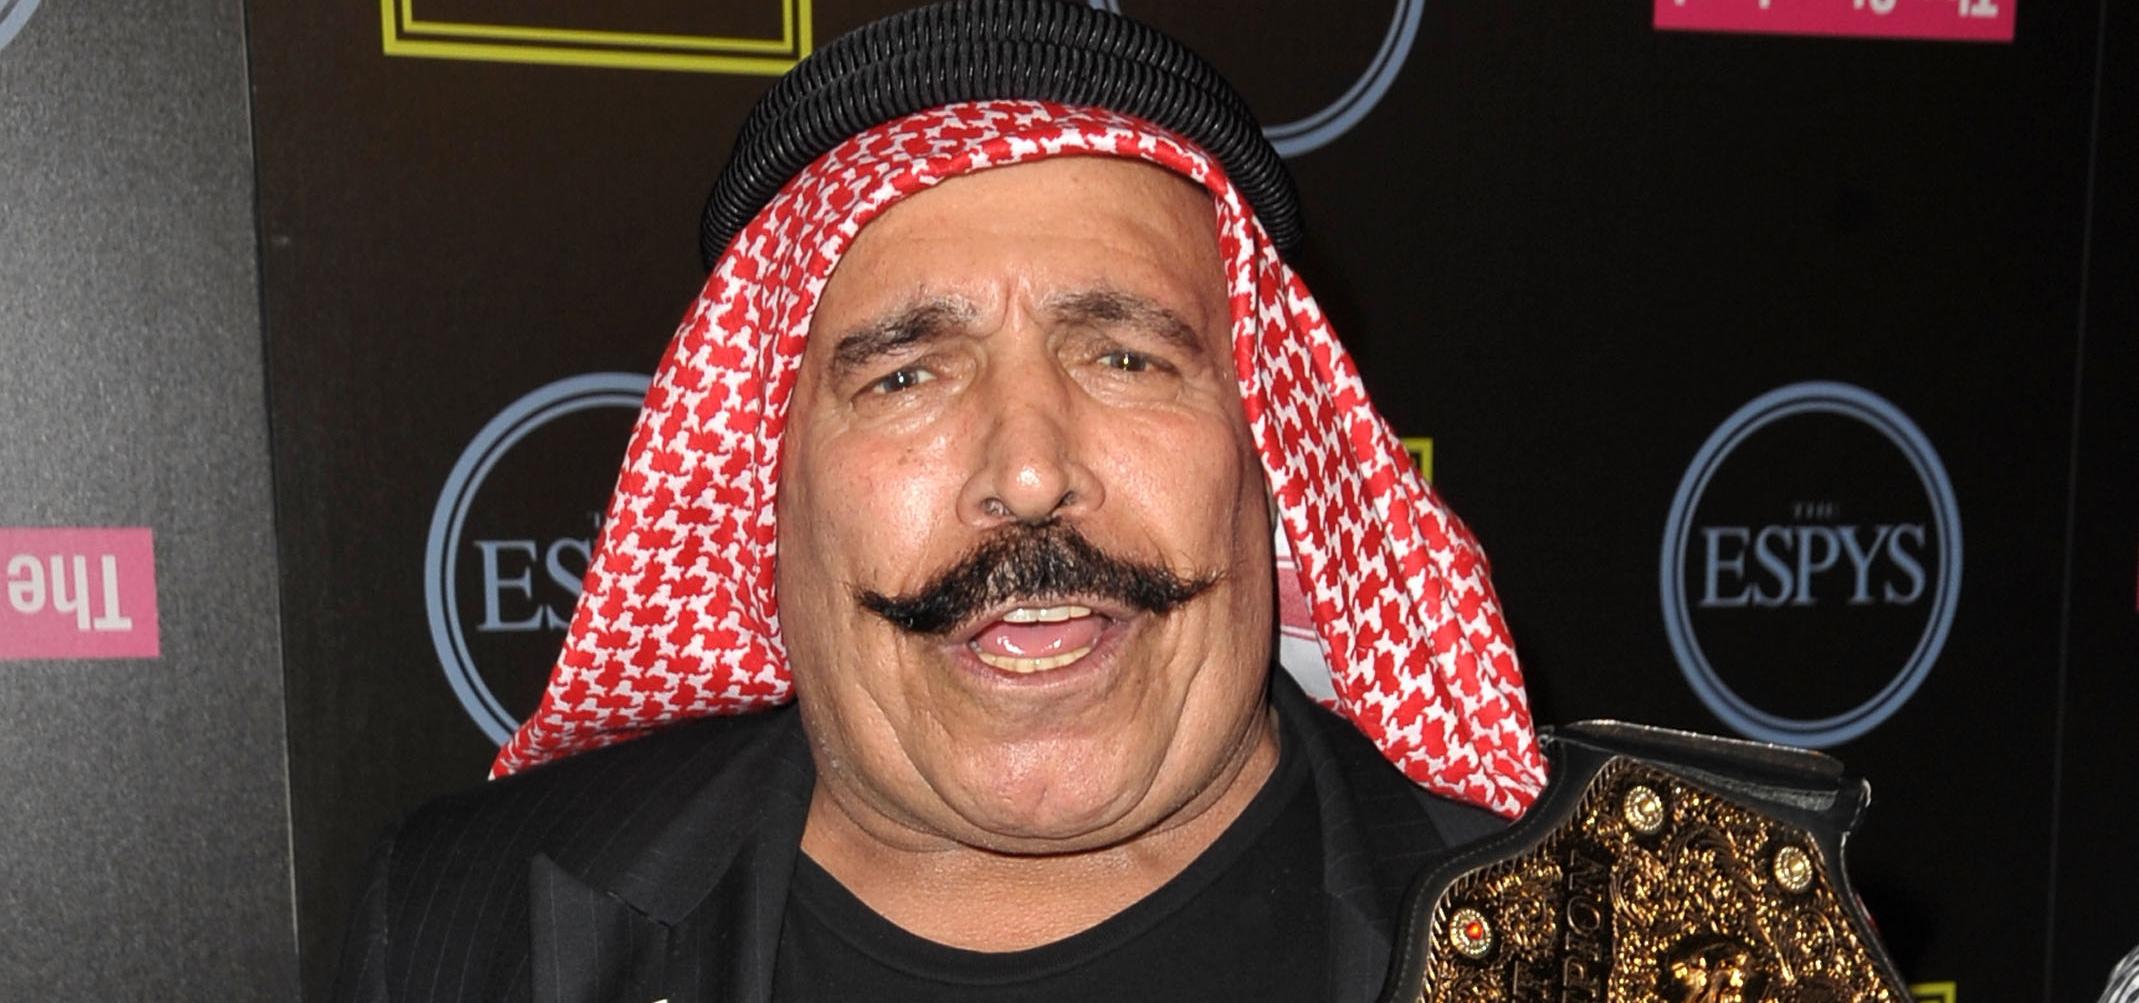 The Iron Sheik at the 17th Annual ESPY Awards Celebration of Champions on July 14, 2009